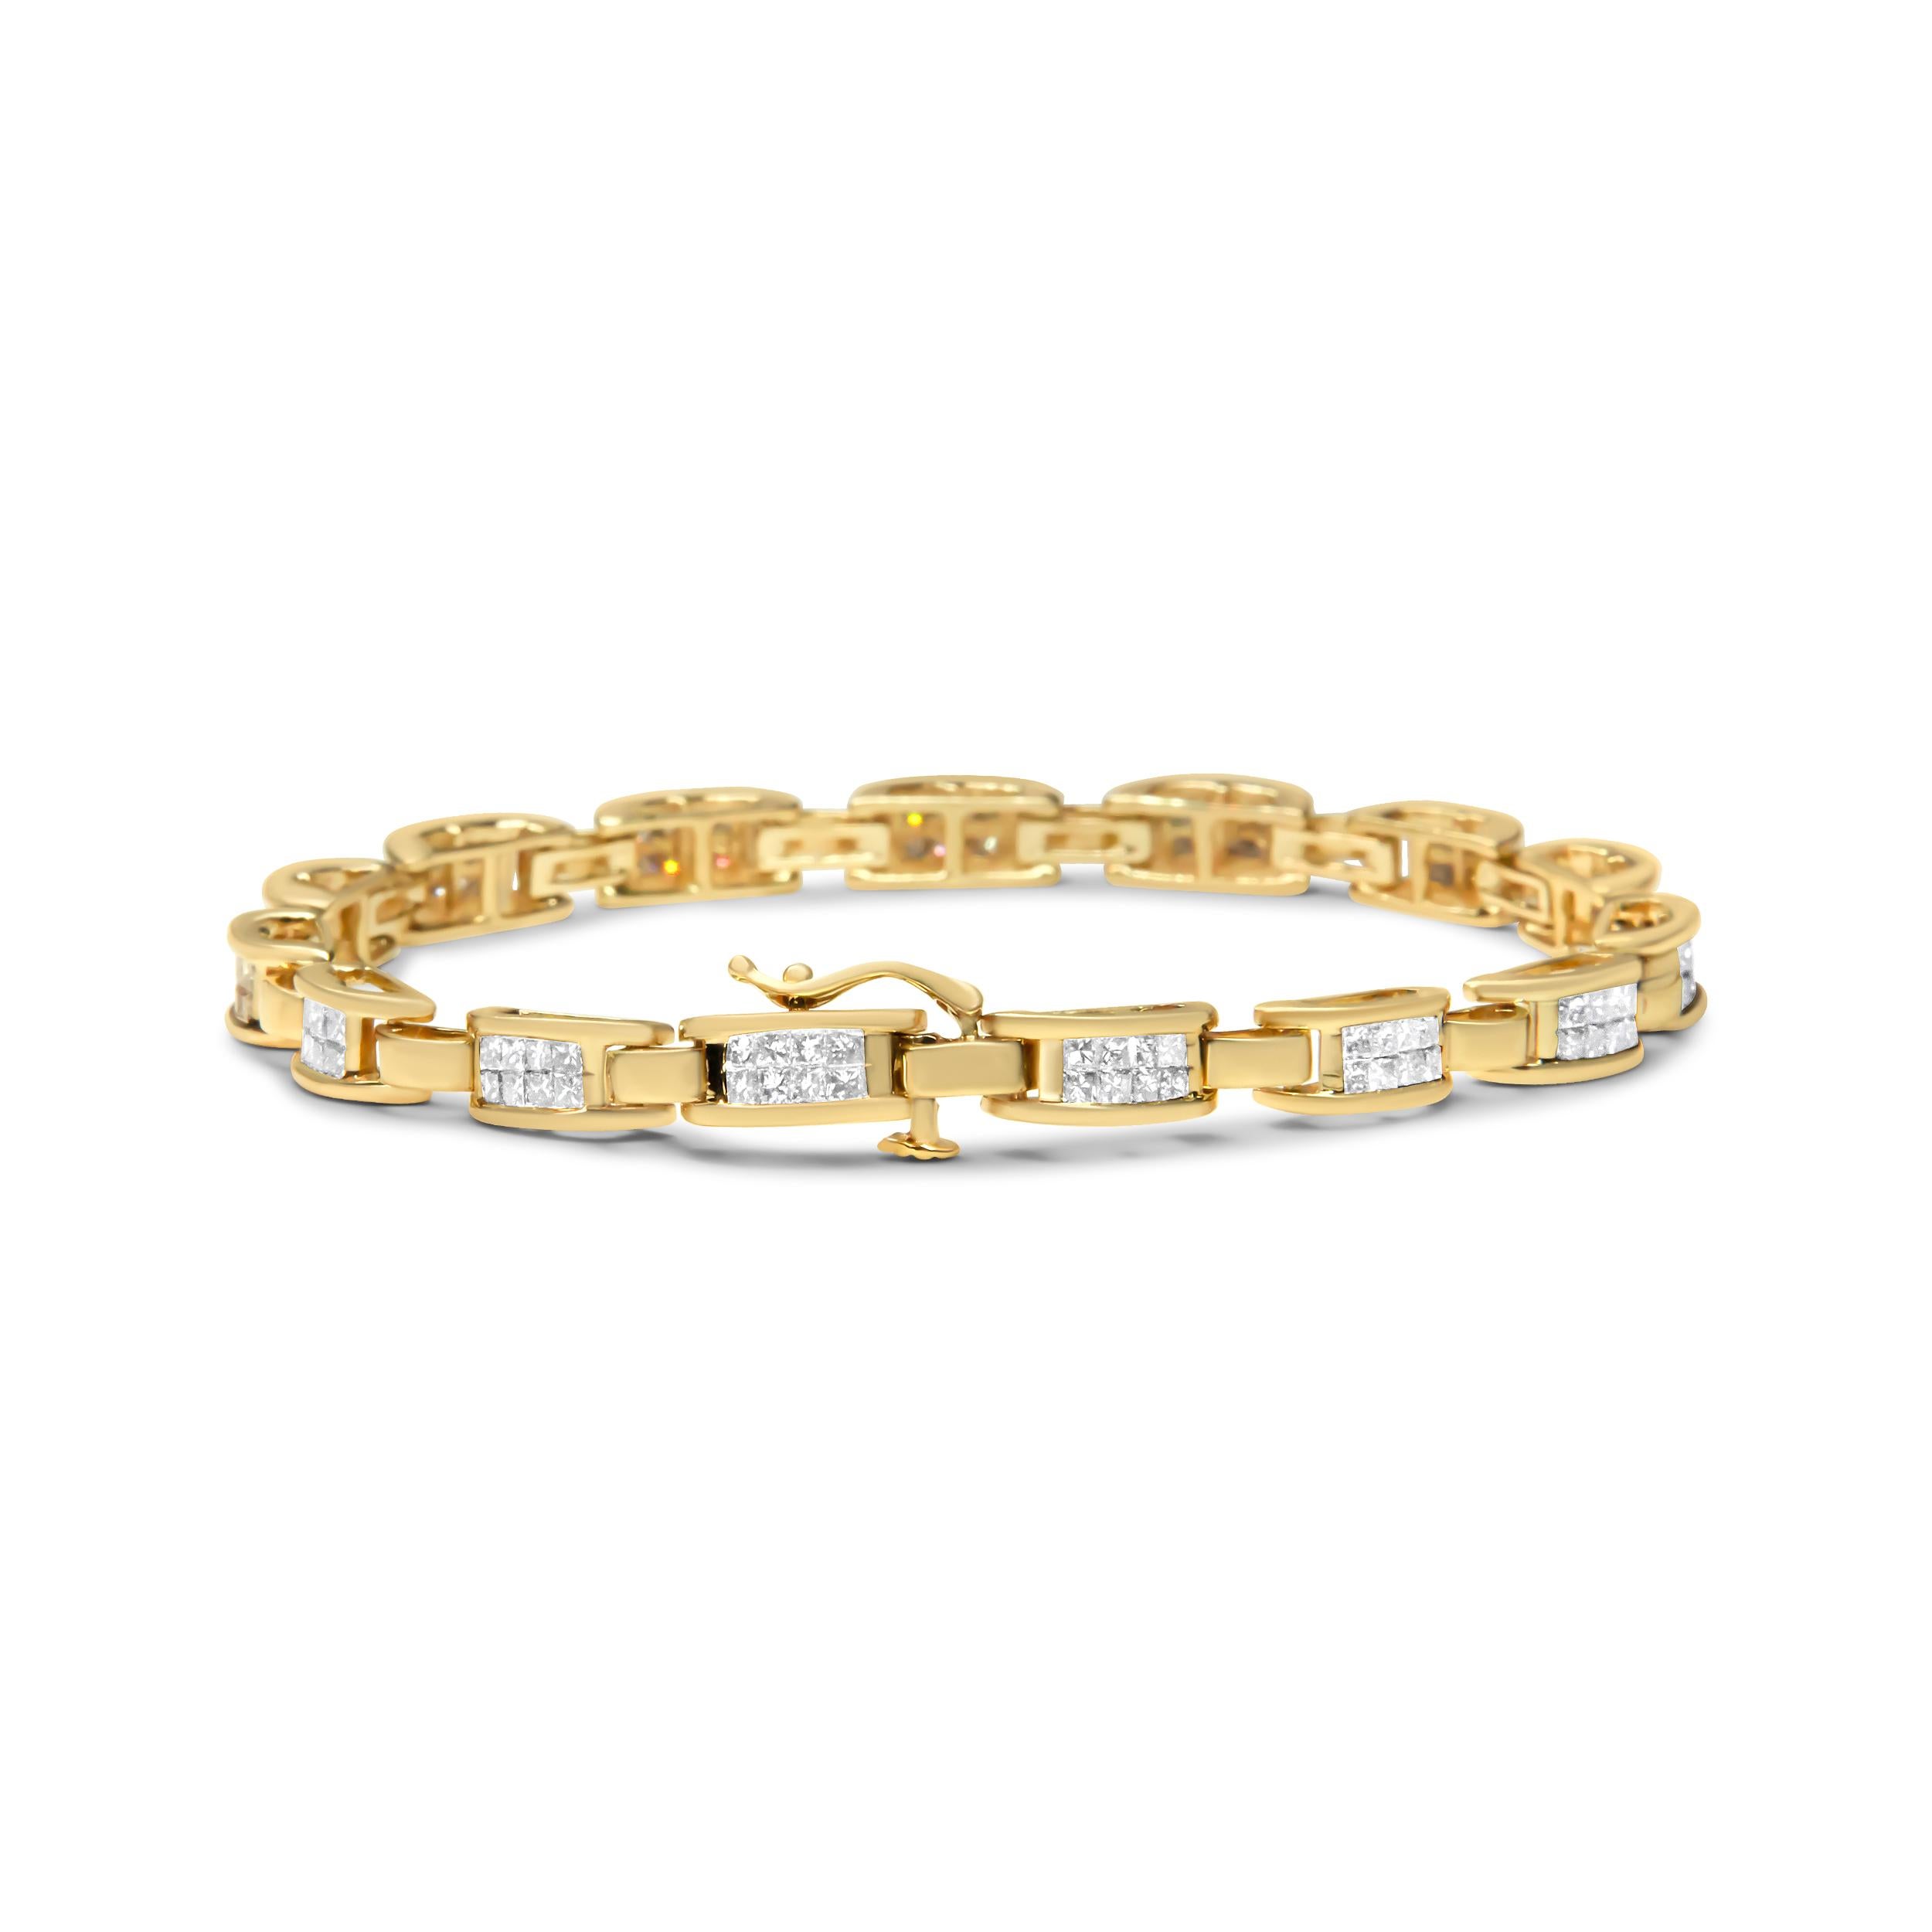 This glistening bracelet is designed with a gold s-link pattern that will shine on you wrist. Each link frames a stunning, natural round-cut diamond in an elegant prong setting. The piece boasts an impressive total diamond weight of 4.0 cttw and is